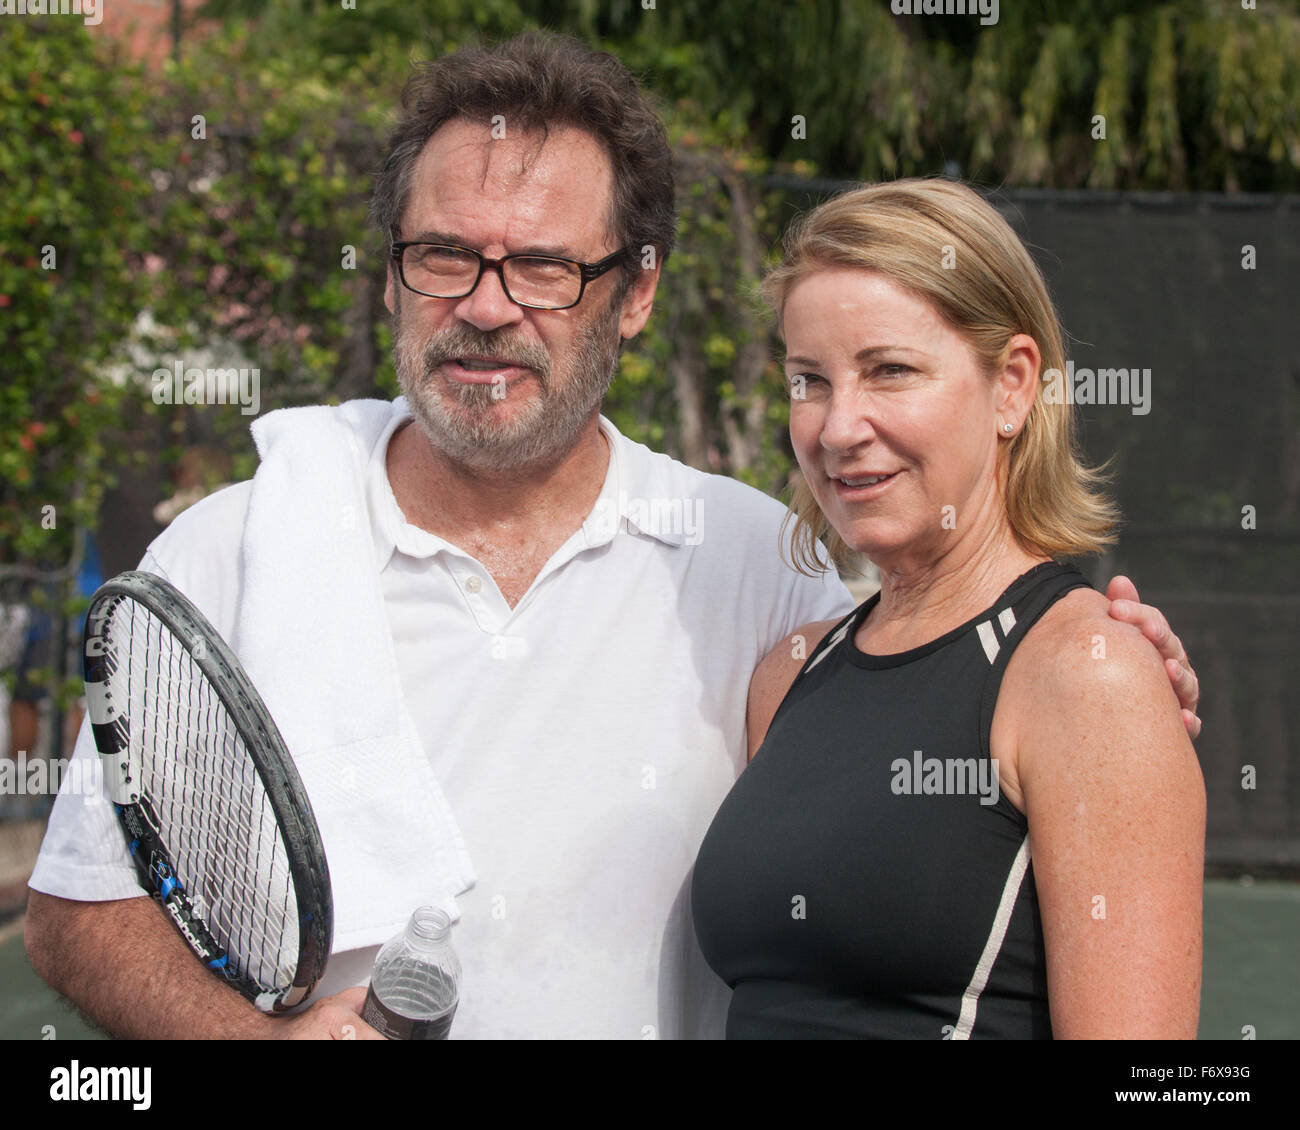 Boca Raton, Florida, US. 20th Nov, 2015. Talk show host, comedian and TV & radio personality Dennis Miller with tennis legend Chris Evert, during media day, at the 26th Annual Chris Evert/Raymond James Pro-Celebrity Tennis Classic at the Boca Raton Resort & Club in Florida. Chris Evert Charities has raised almost $ 22 million for Florida's most at-risk children. Credit:  Arnold Drapkin/ZUMA Wire/Alamy Live News Stock Photo